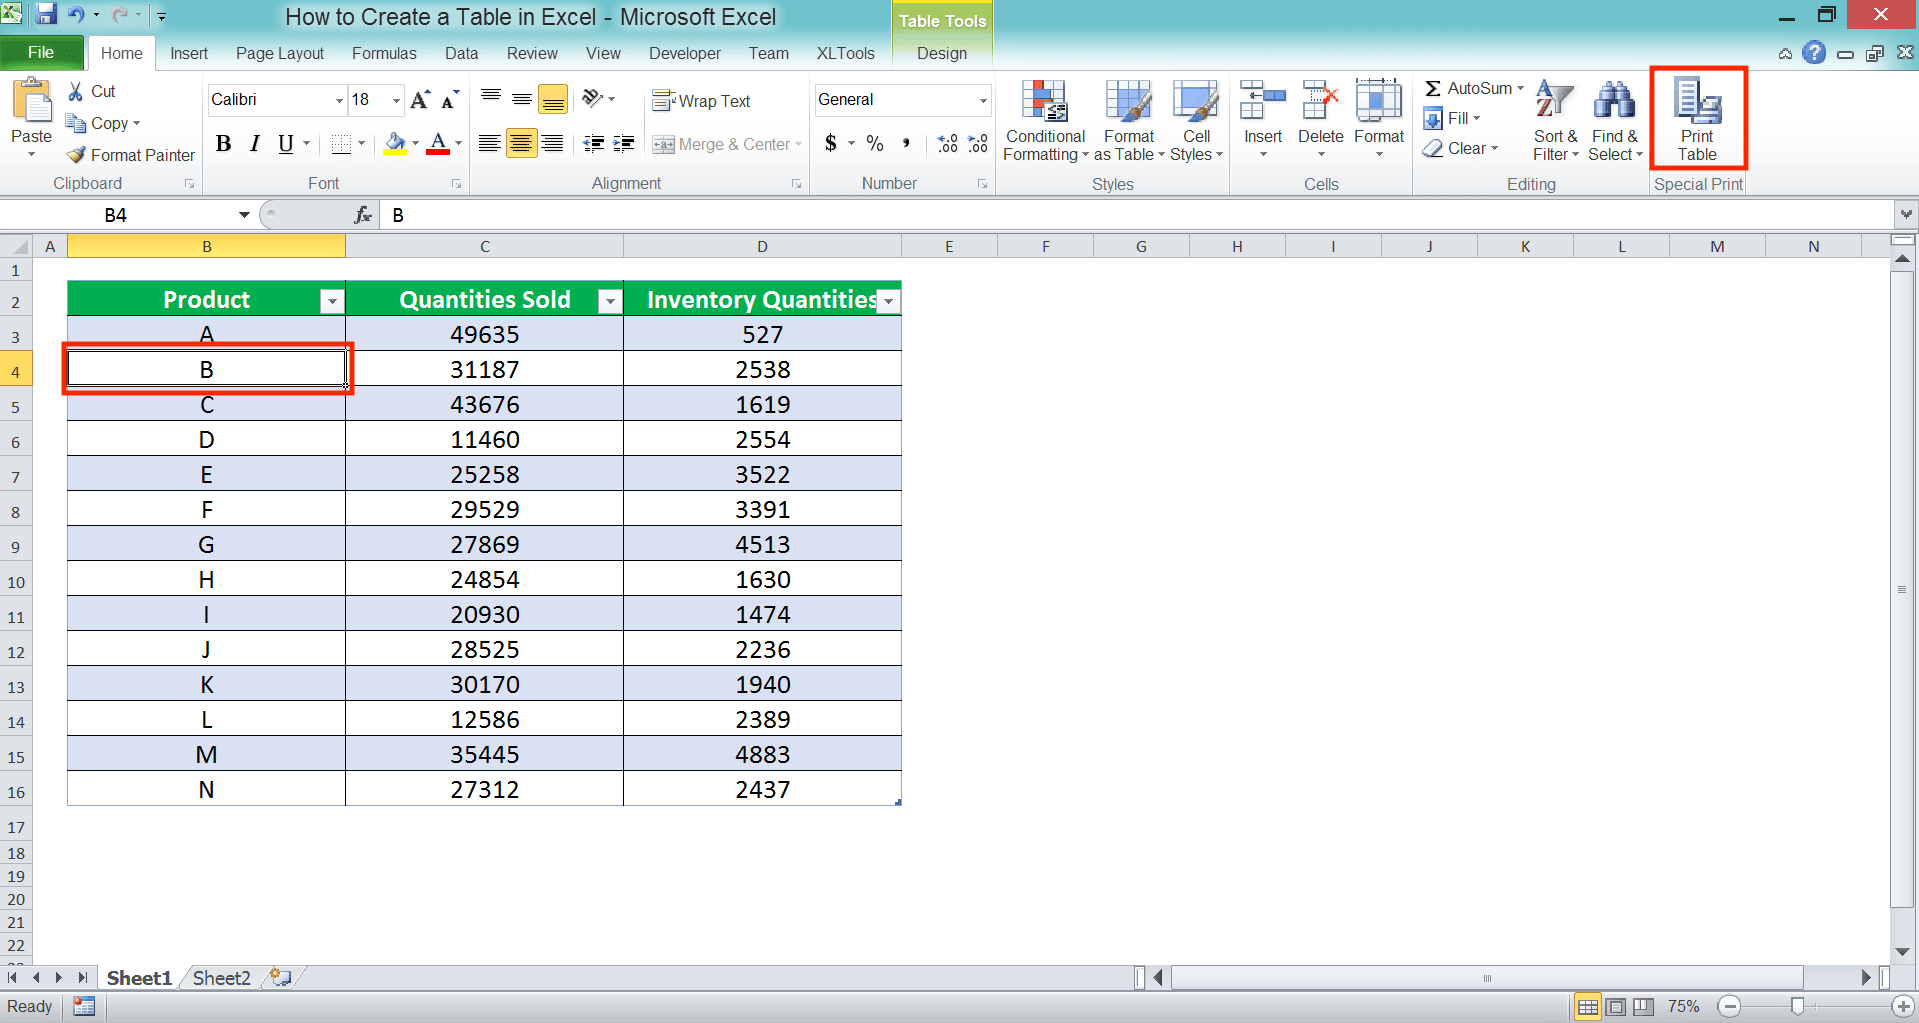 How to Make a Table in Excel - Screenshot of the Print List Button Usage Example